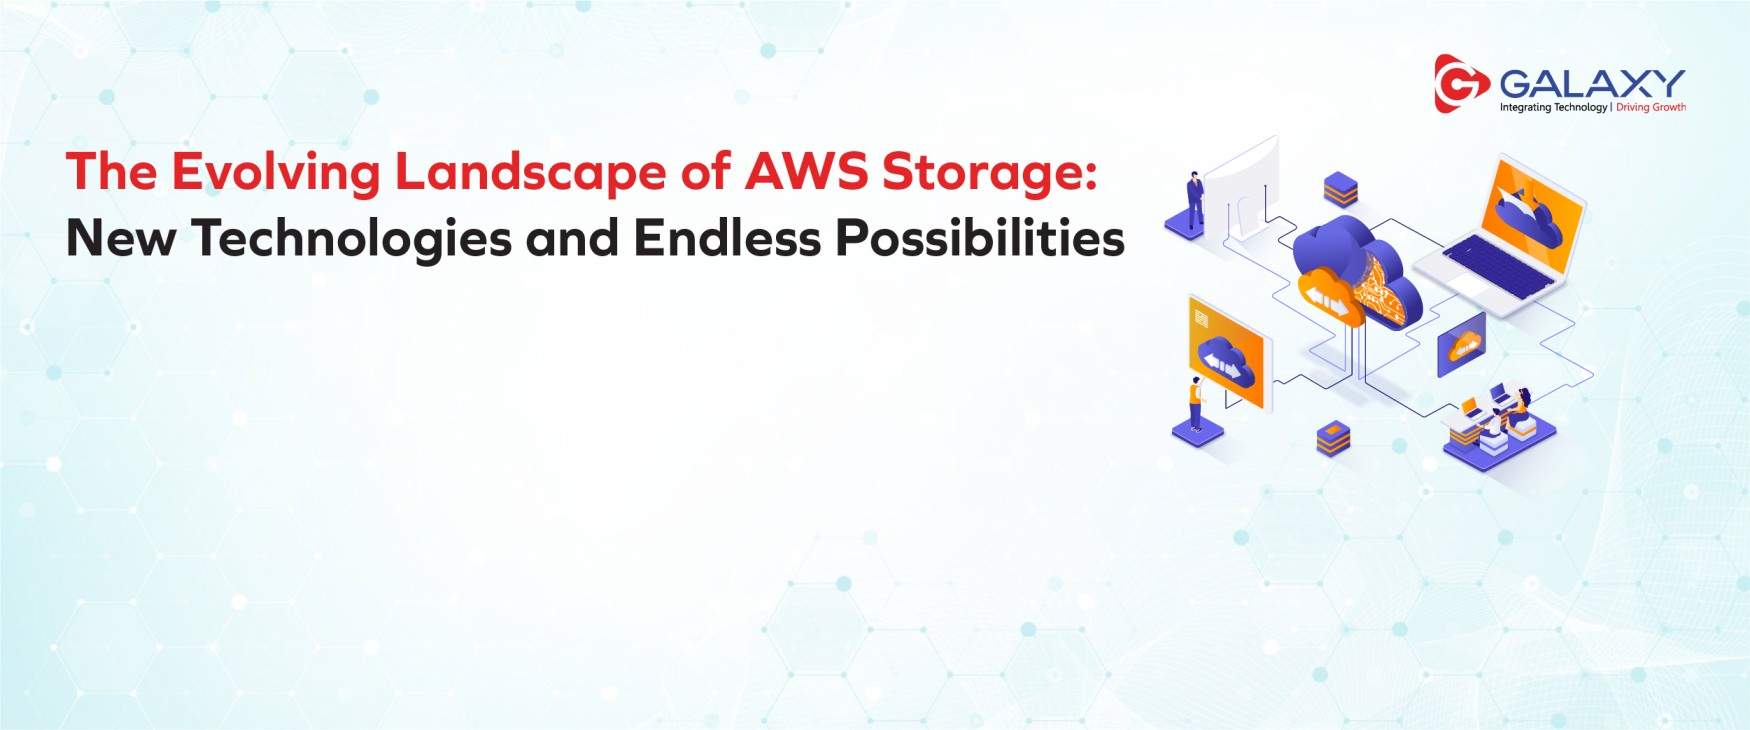 The Evolving Landscape of AWS Storage: New Technologies and Endless Possibilities